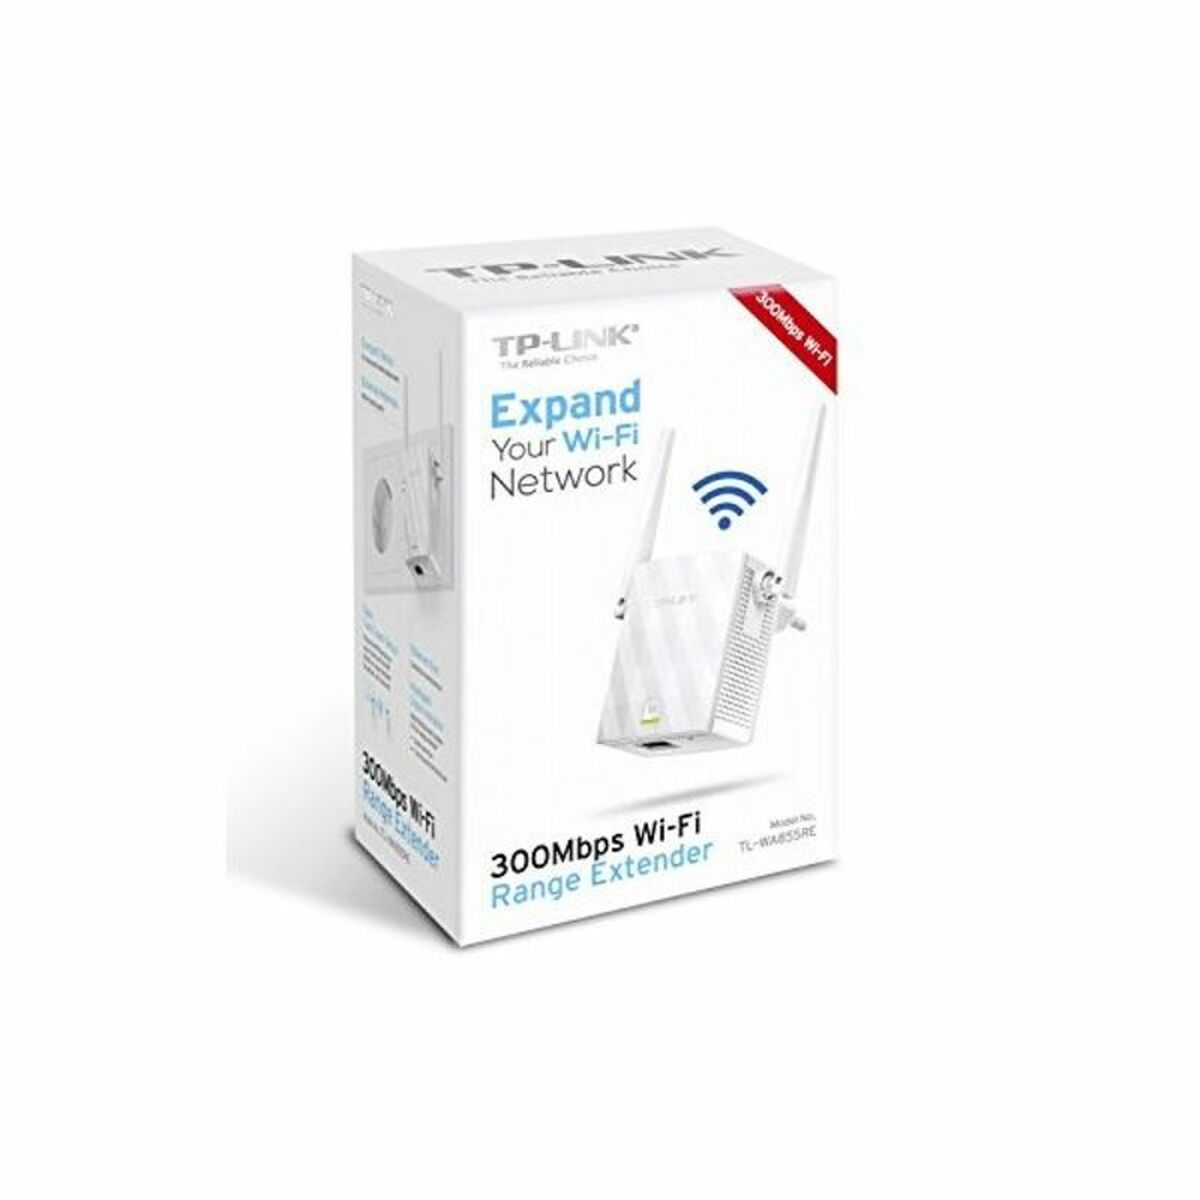 Repetor Wifi TP-Link TL-WA855RE N300 300 Mbps 2,4 Ghz